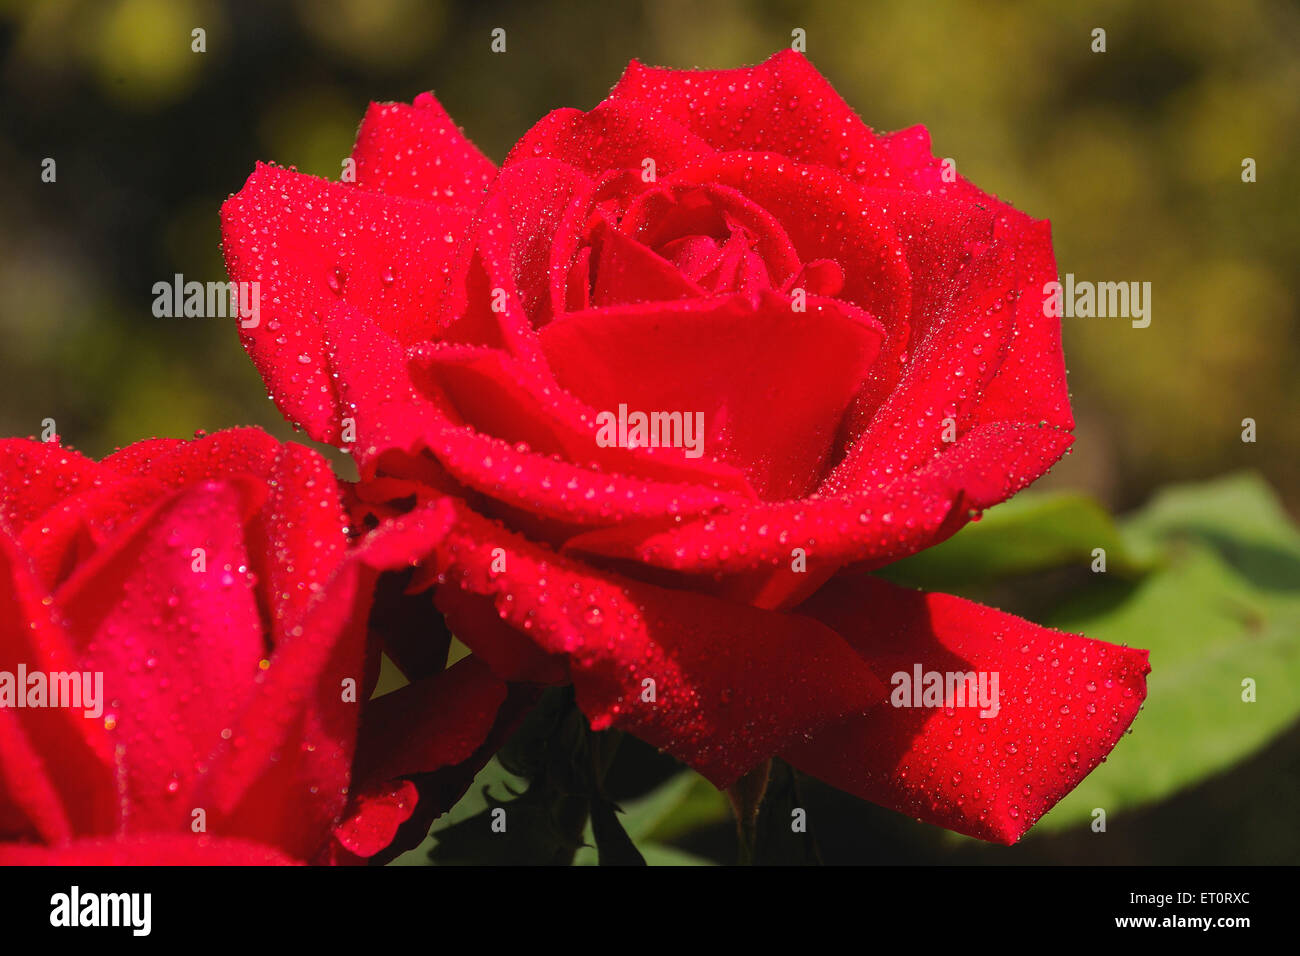 red rose flower with dew drops Stock Photo